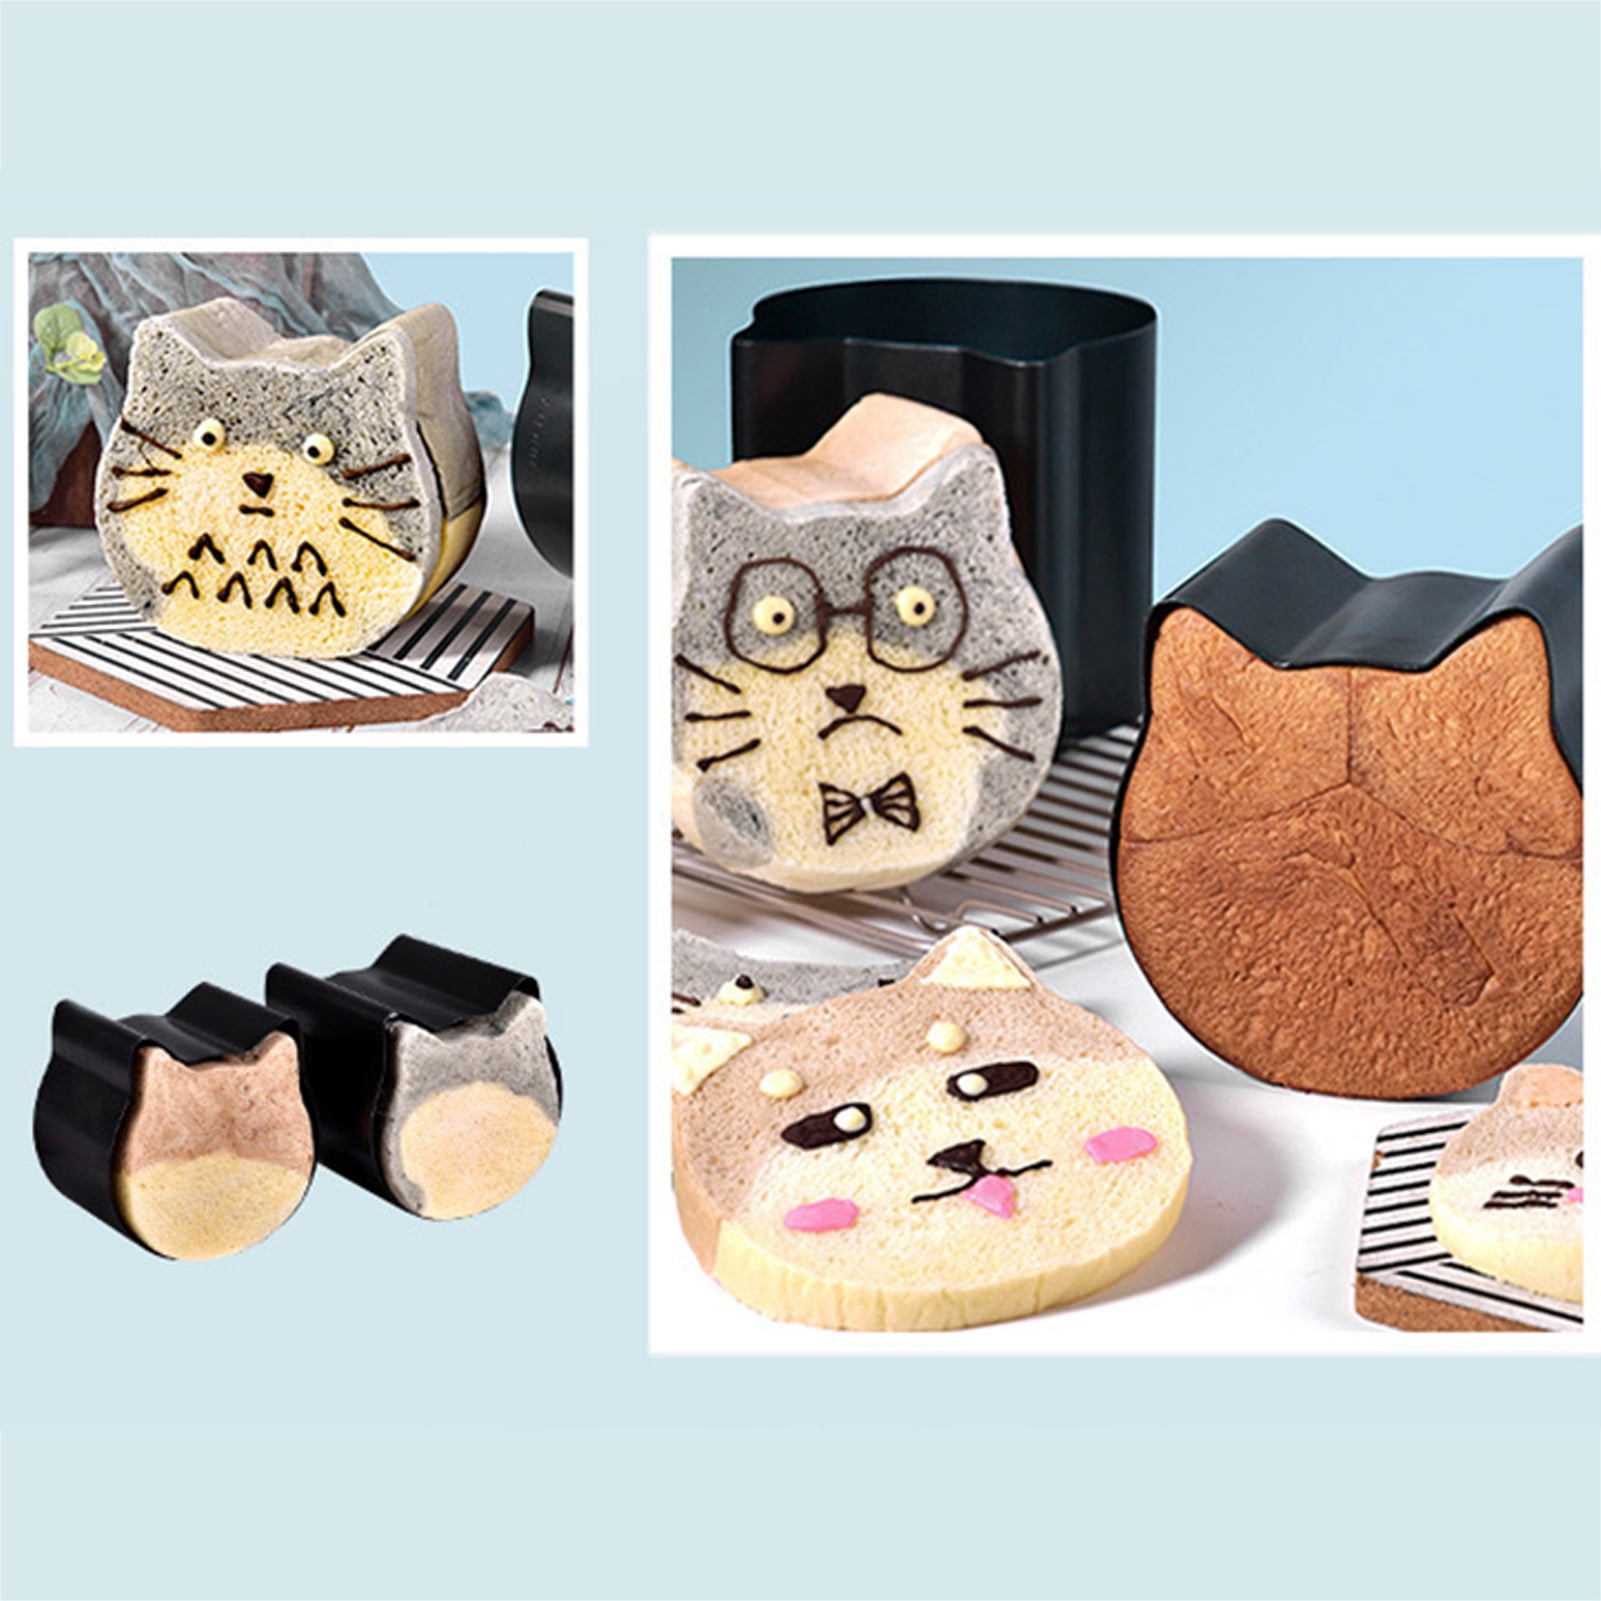 Cat Bread Mold Made in JAPAN Pig Loaf Toast Baking Home Bakery Tool Supply  cotta